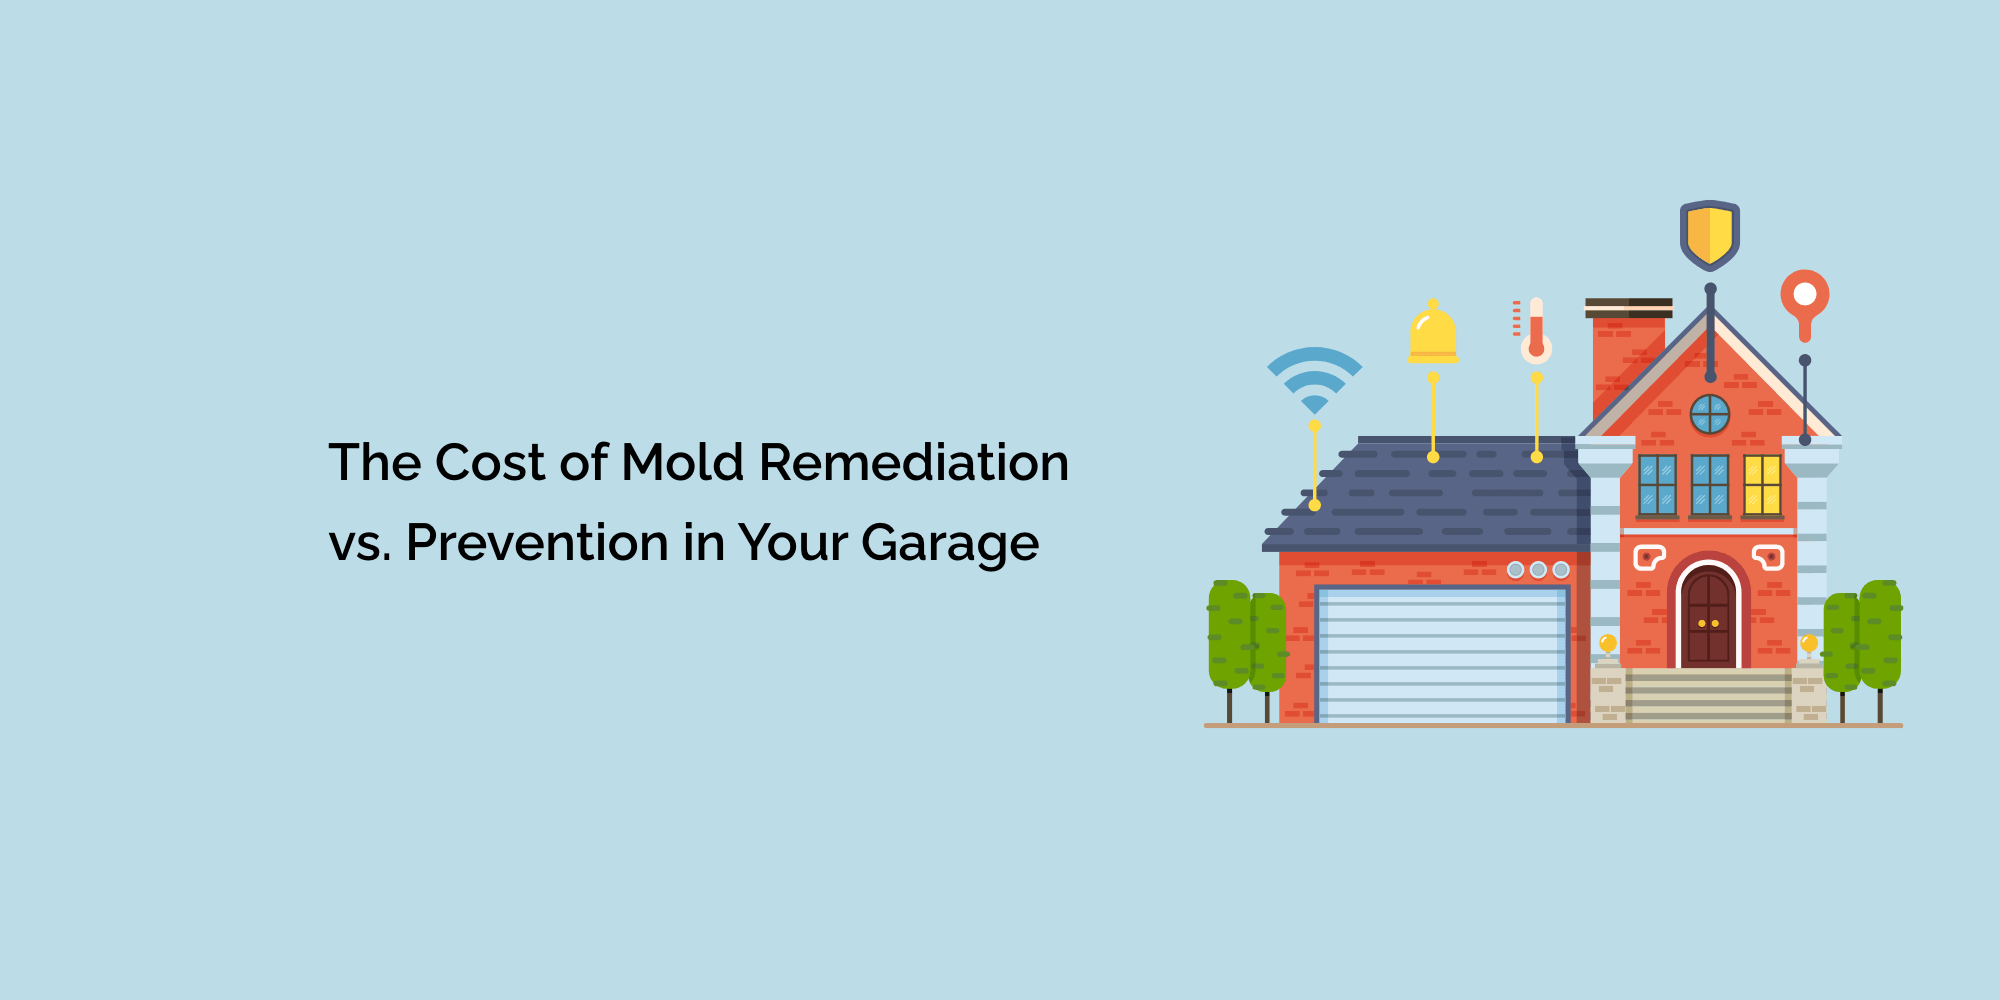 The Cost of Mold Remediation vs. Prevention in Your Garage